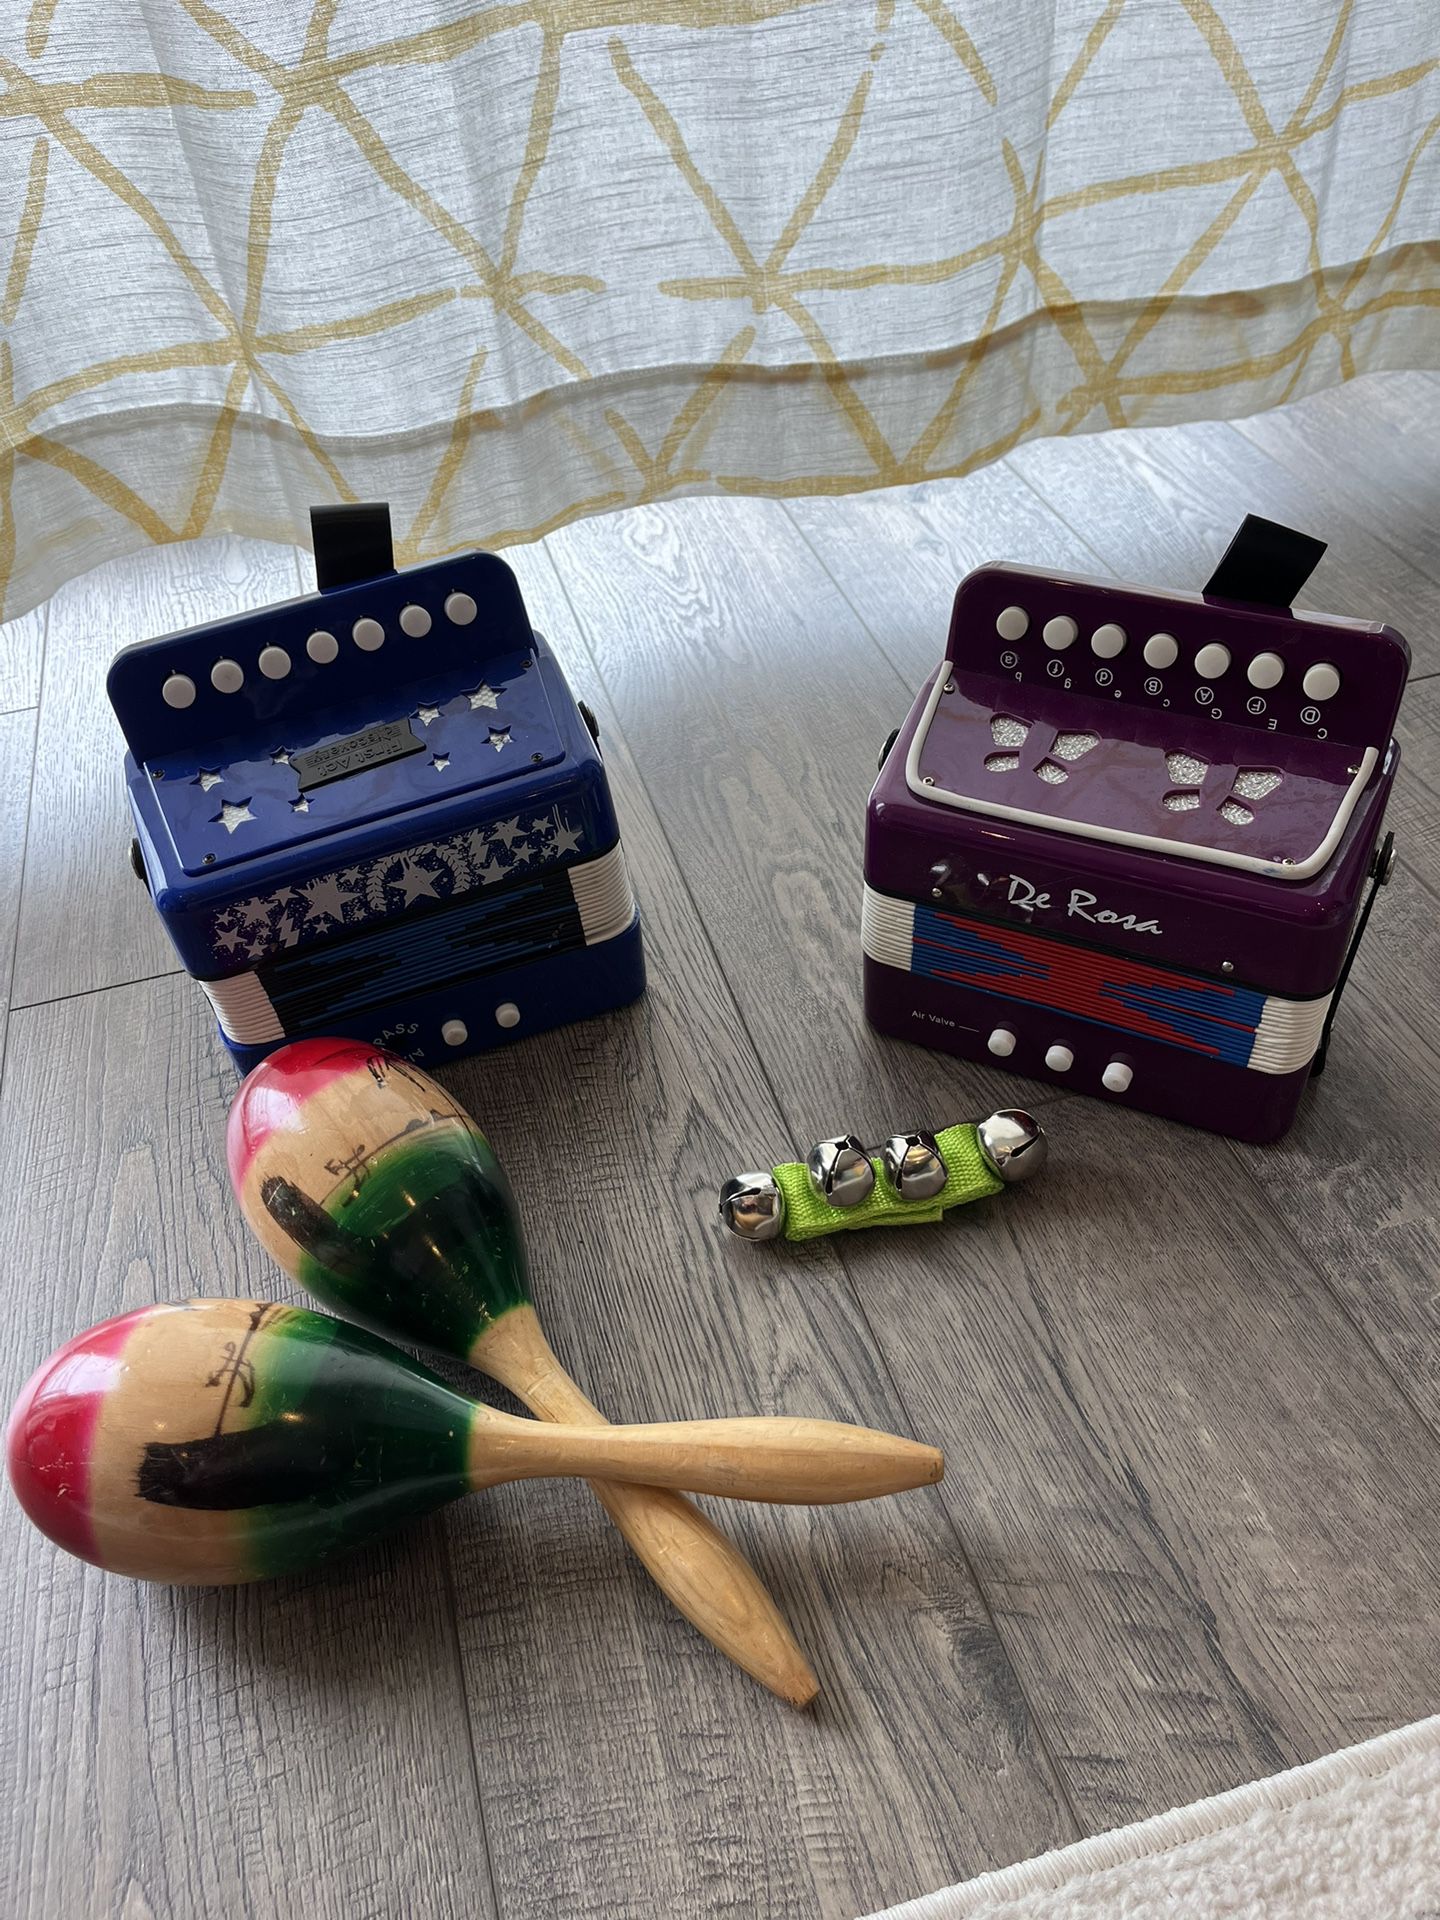 Kid’s Musical Instrument Toys